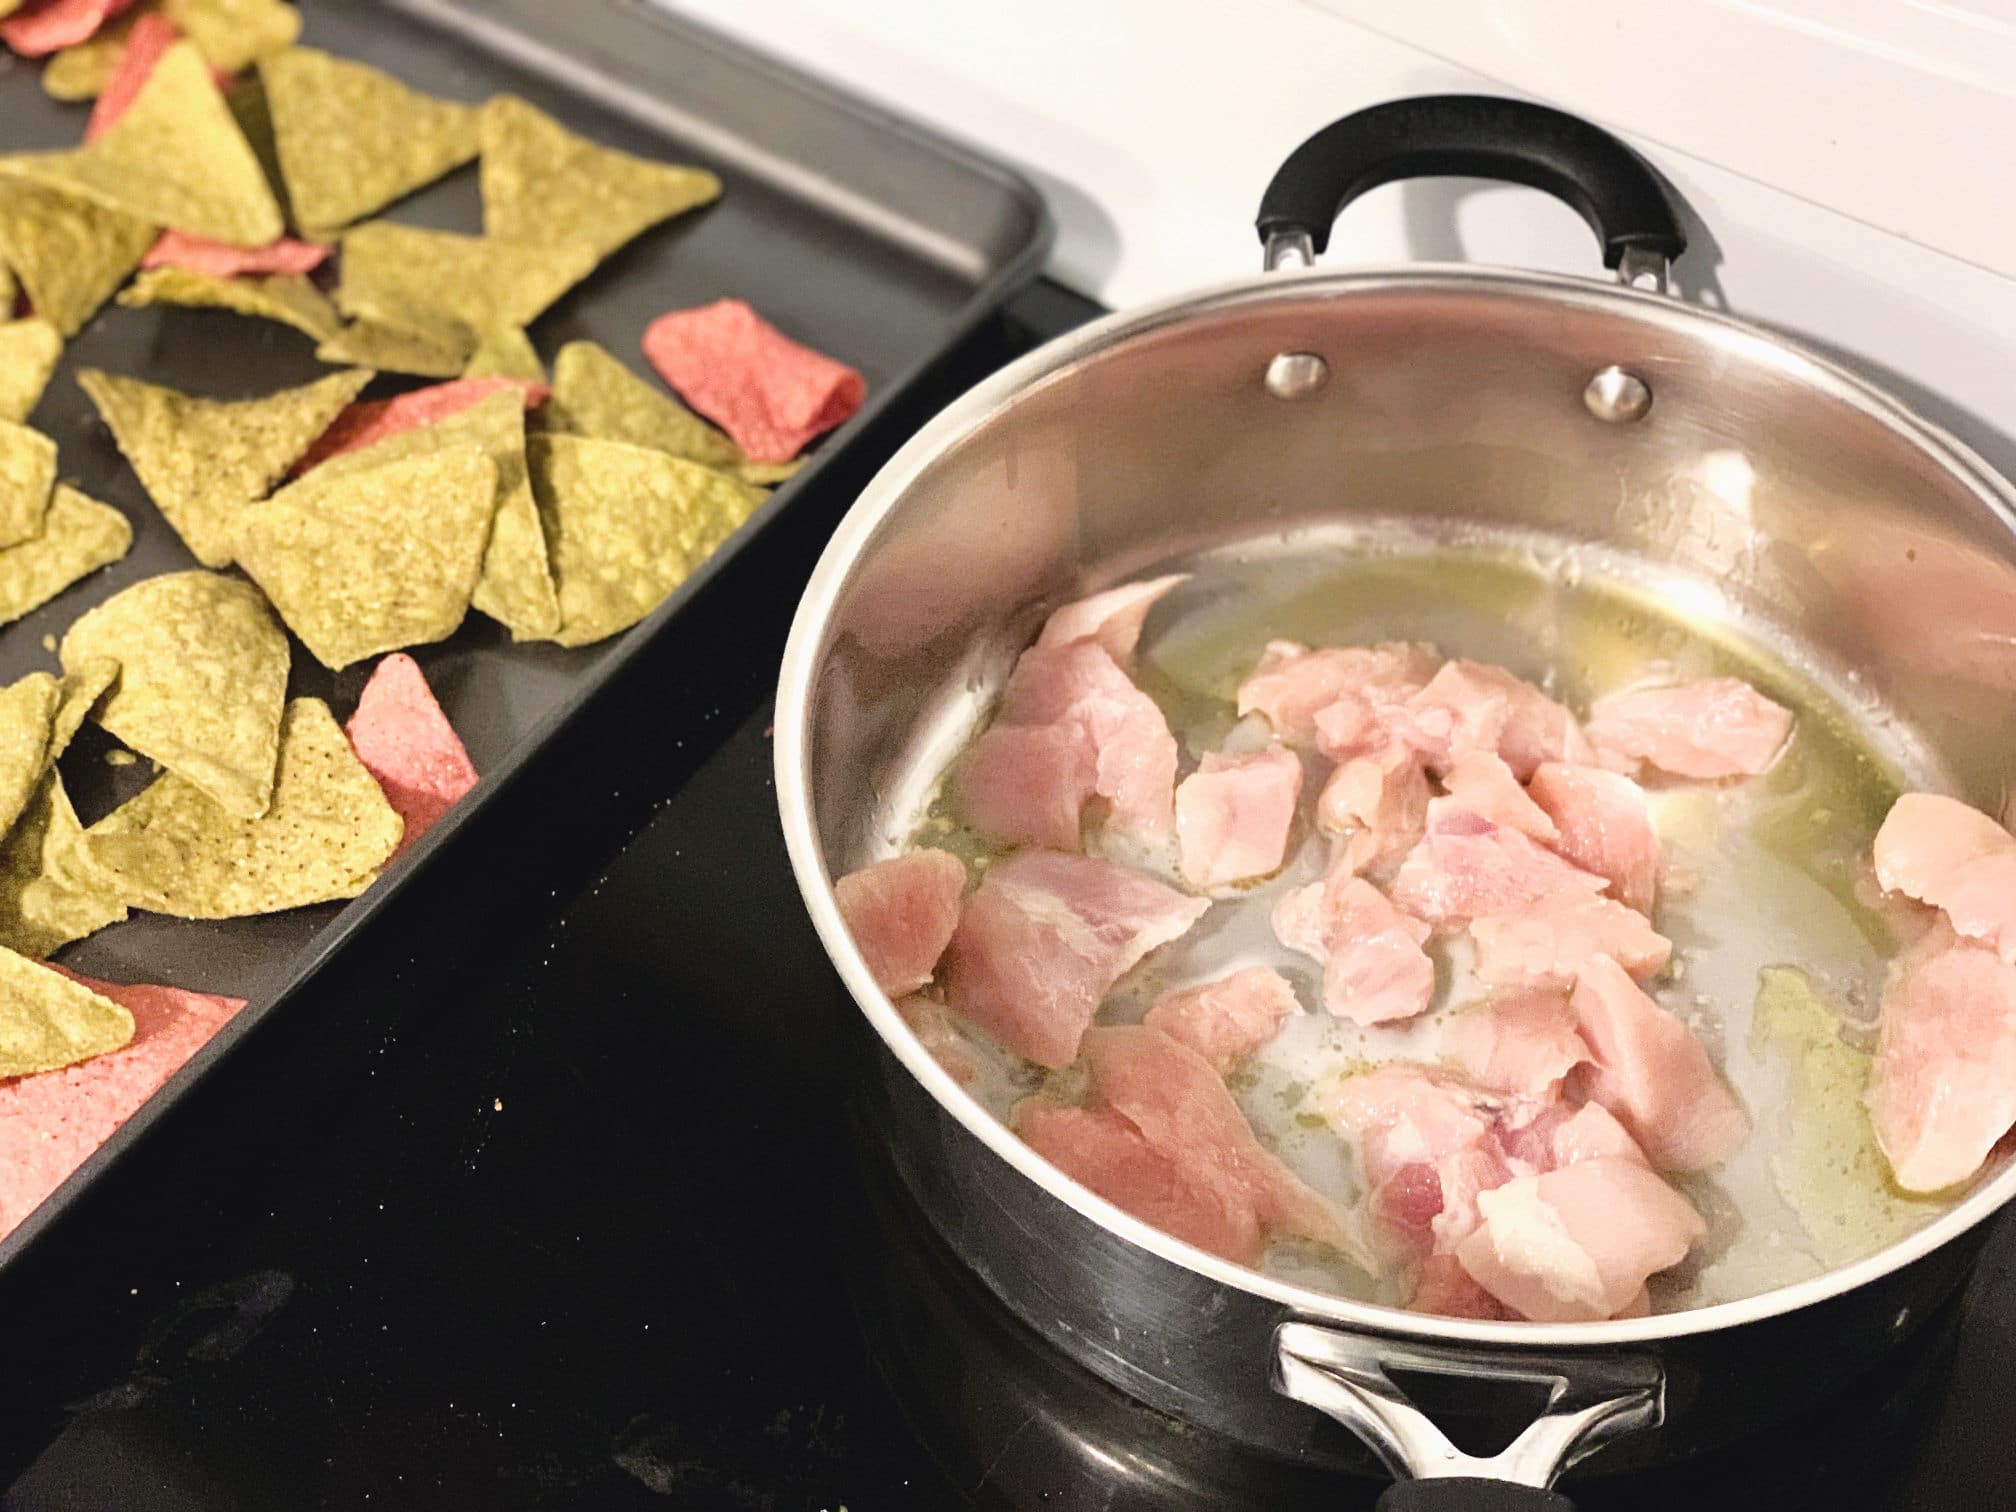 raw chicken cooking in a skillet next to tortilla chips on a sheet pan